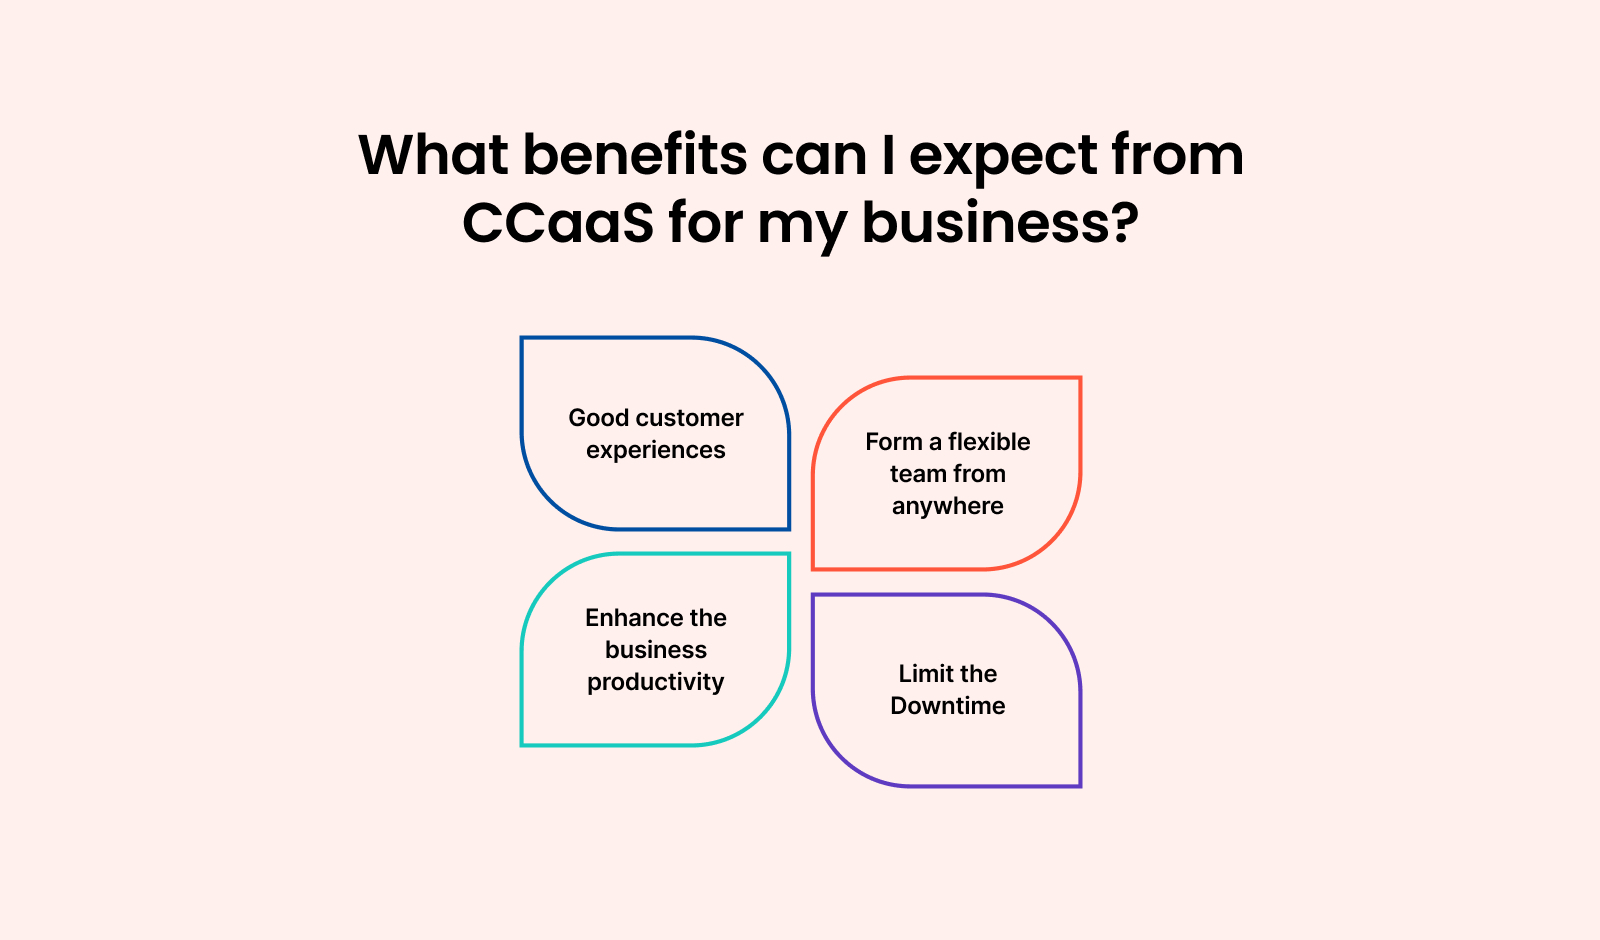 What benefits can I expect from CCaaS for my business?